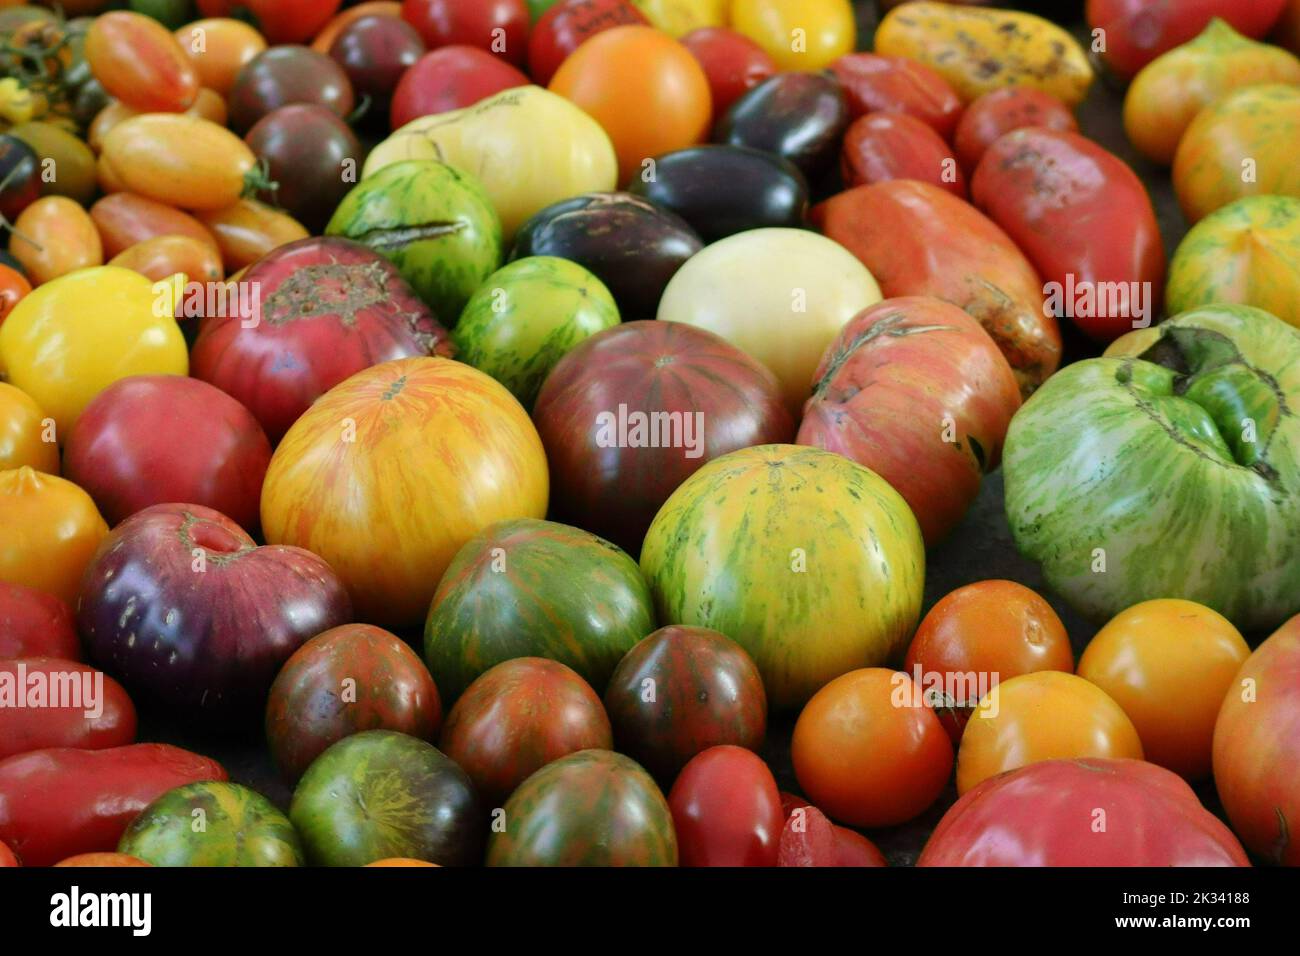 Mainly Giant Zebra Tomatoes on Offer Stock Photo